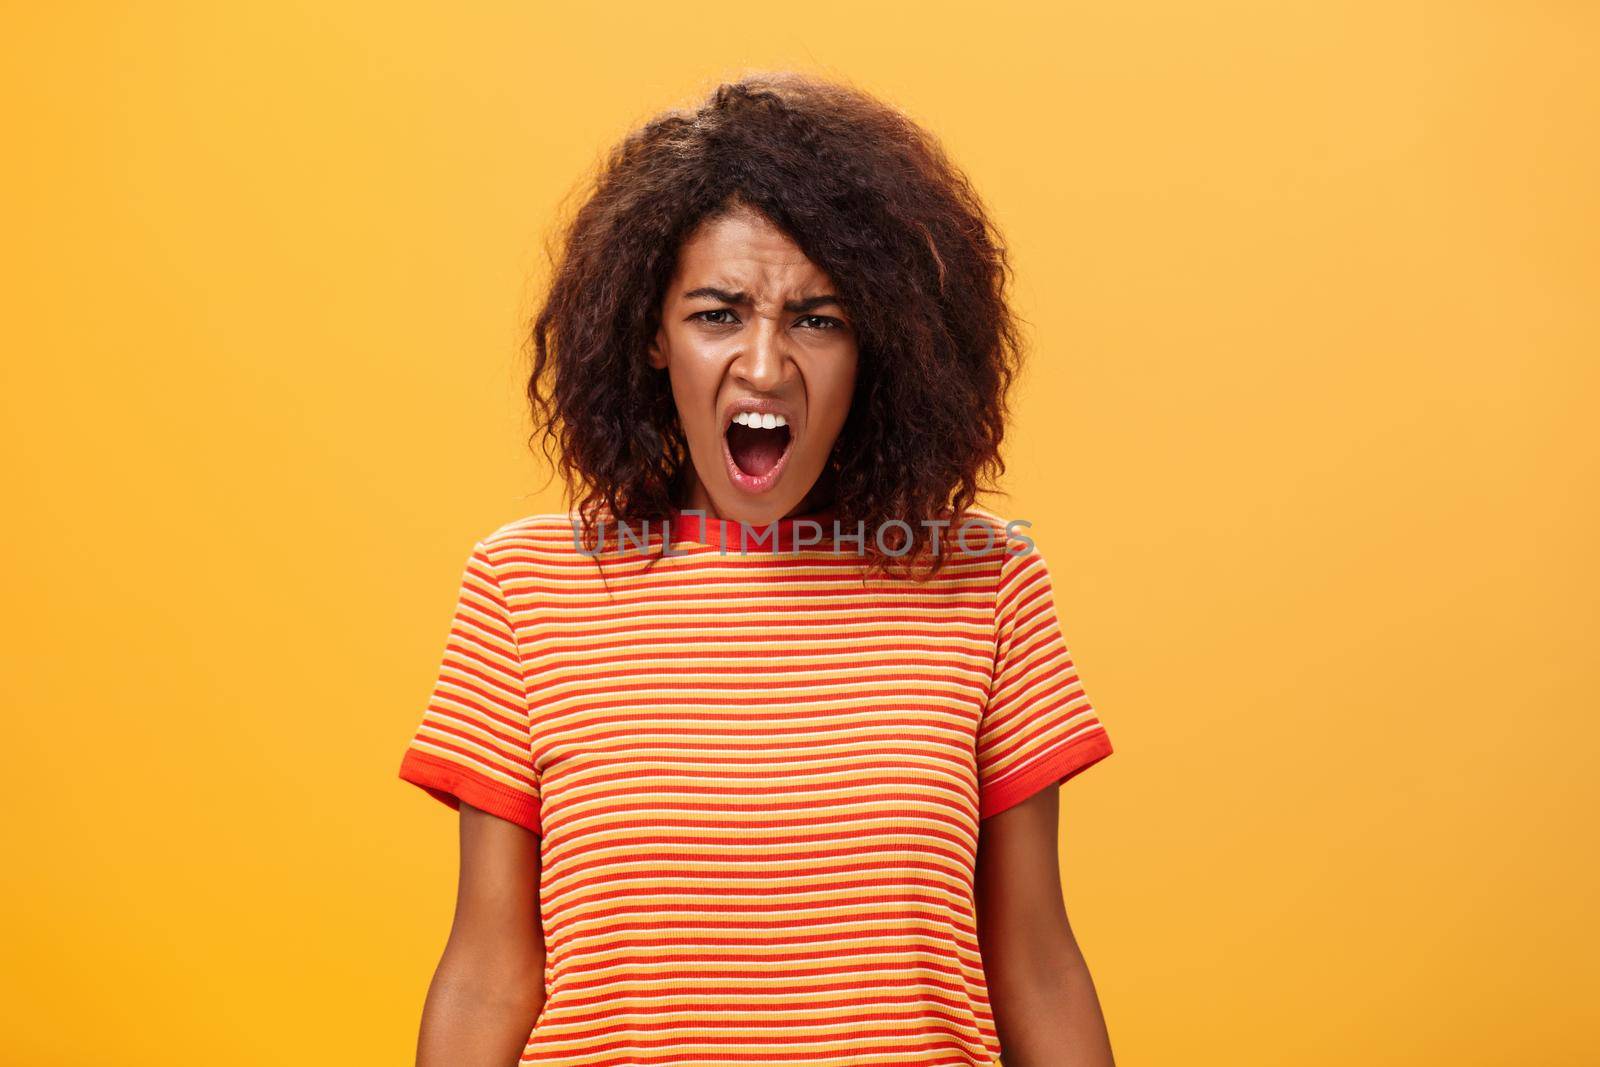 Not fair you broke promise. Portrait of offended displeased moody african american girlfriend with curly hair yelling and complaining making displeased grimace shouting at camera from offence. Emotions concept